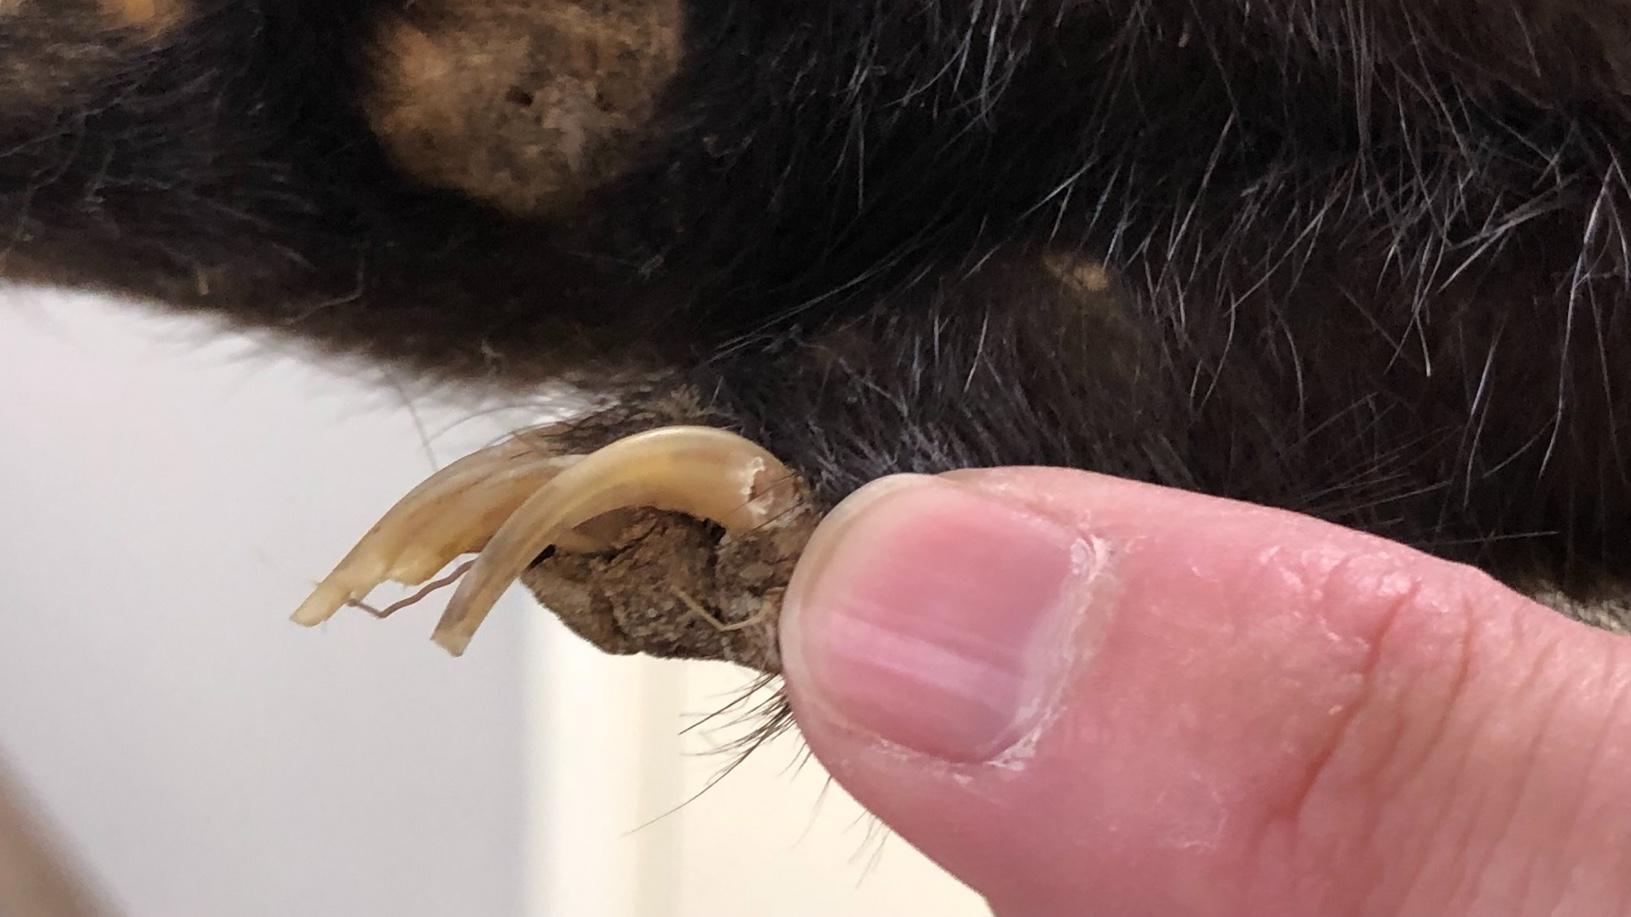 A tiny hole marks the point in a skunk's claw where DNA was extracted. The goal, with museum specimens, is to leave as much intact as possible for future researchers. (Patty Wetli / WTTW News)